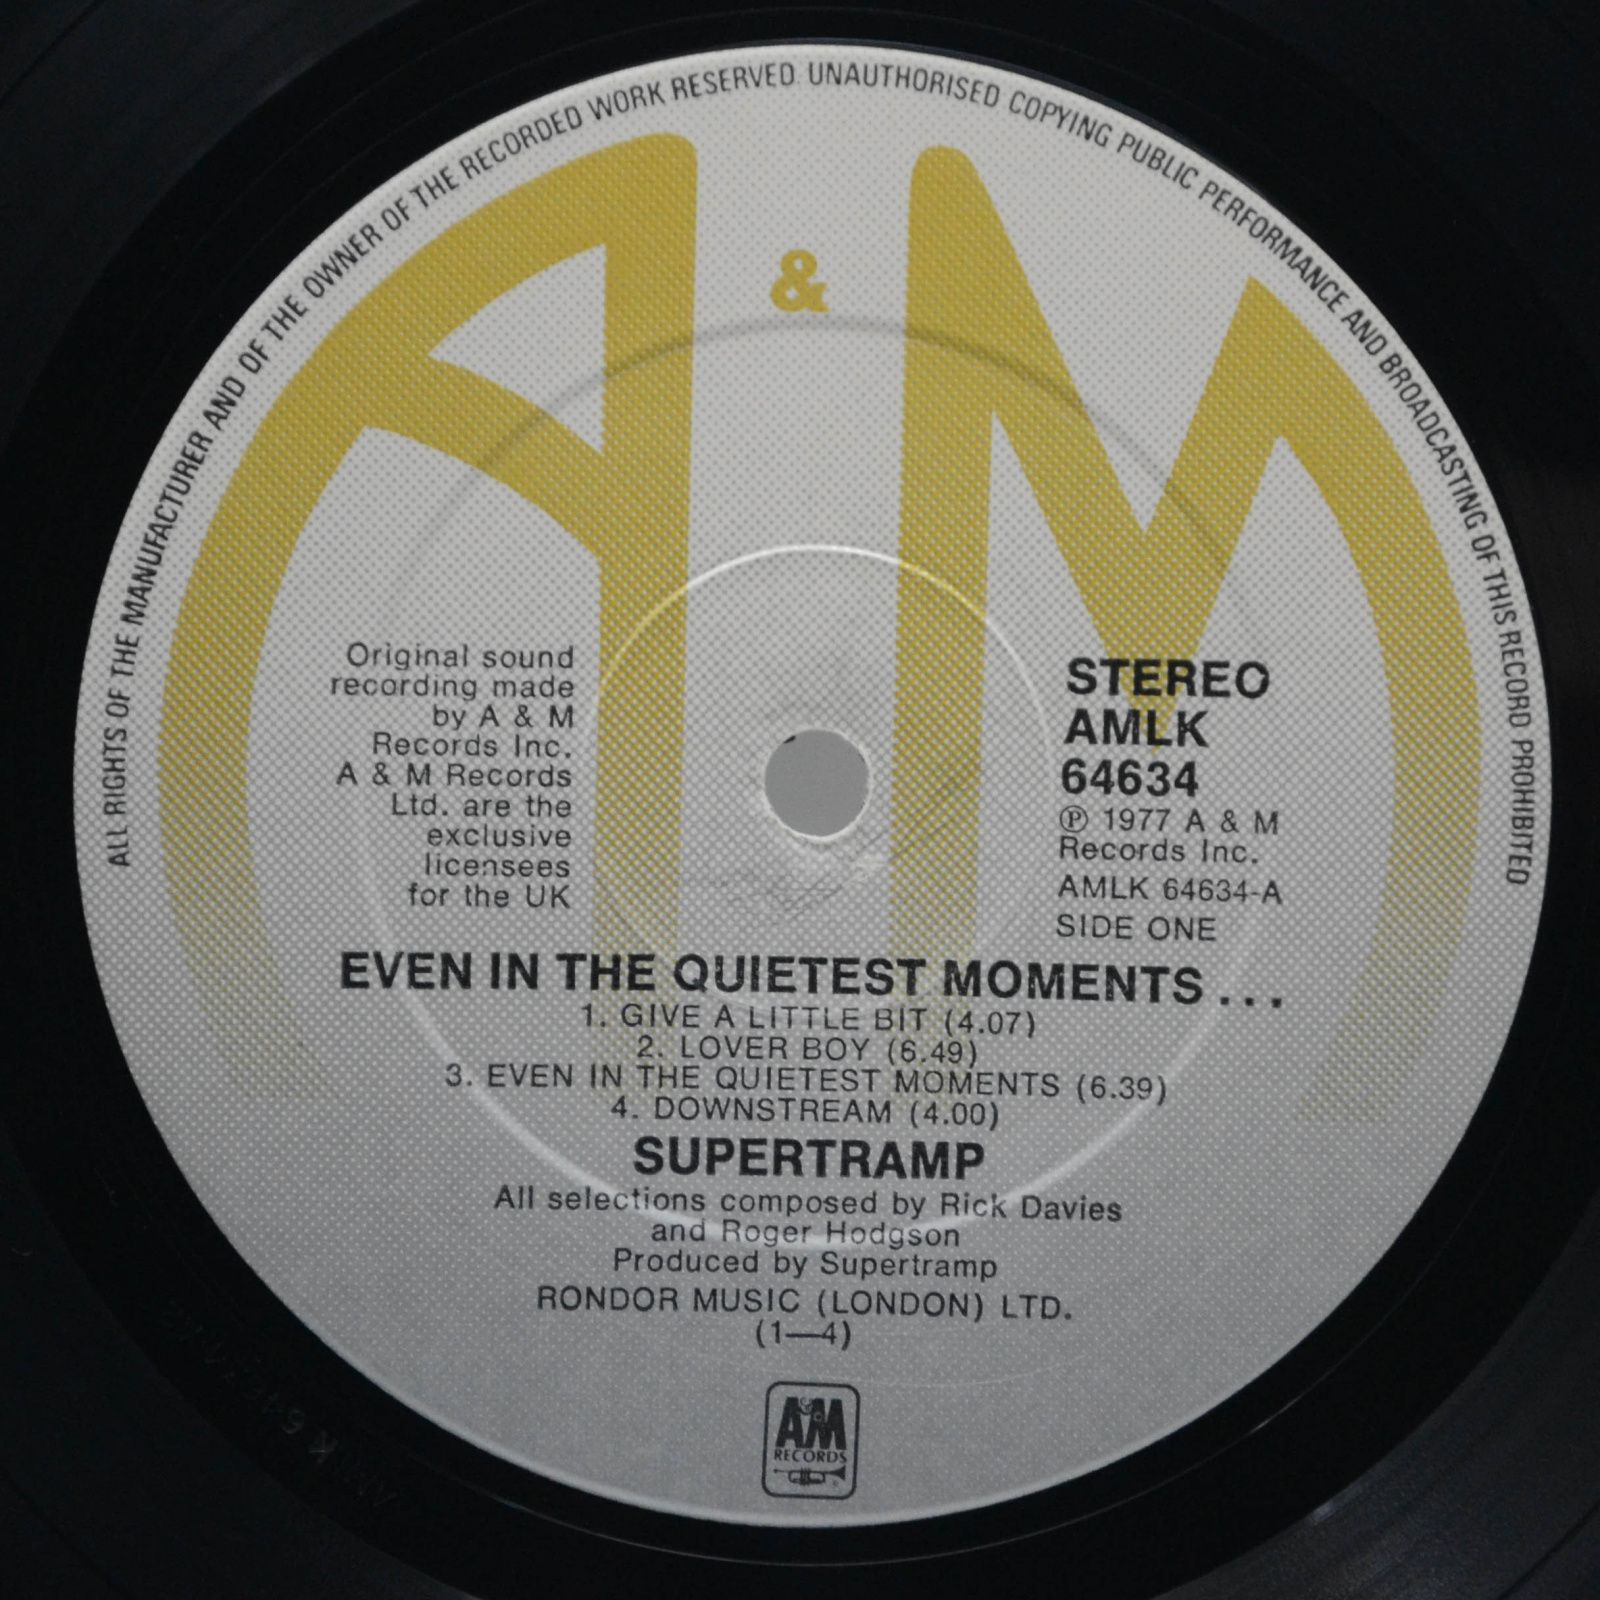 Supertramp — Even In The Quietest Moments... (1-st, UK), 1977